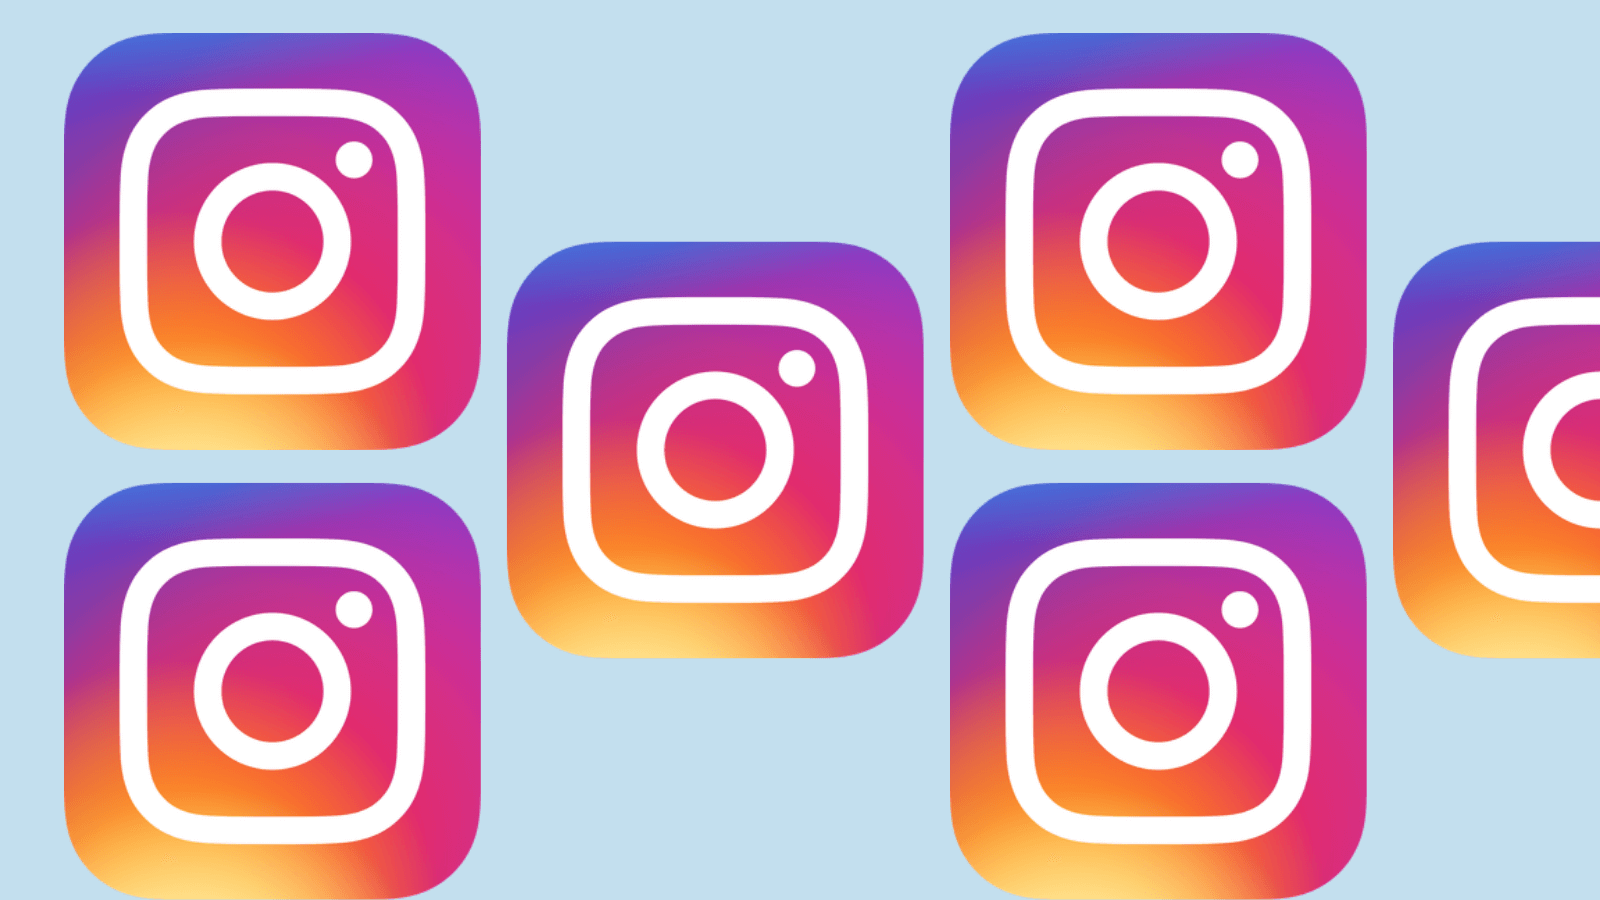 The Instagram logo in a repeating pattern